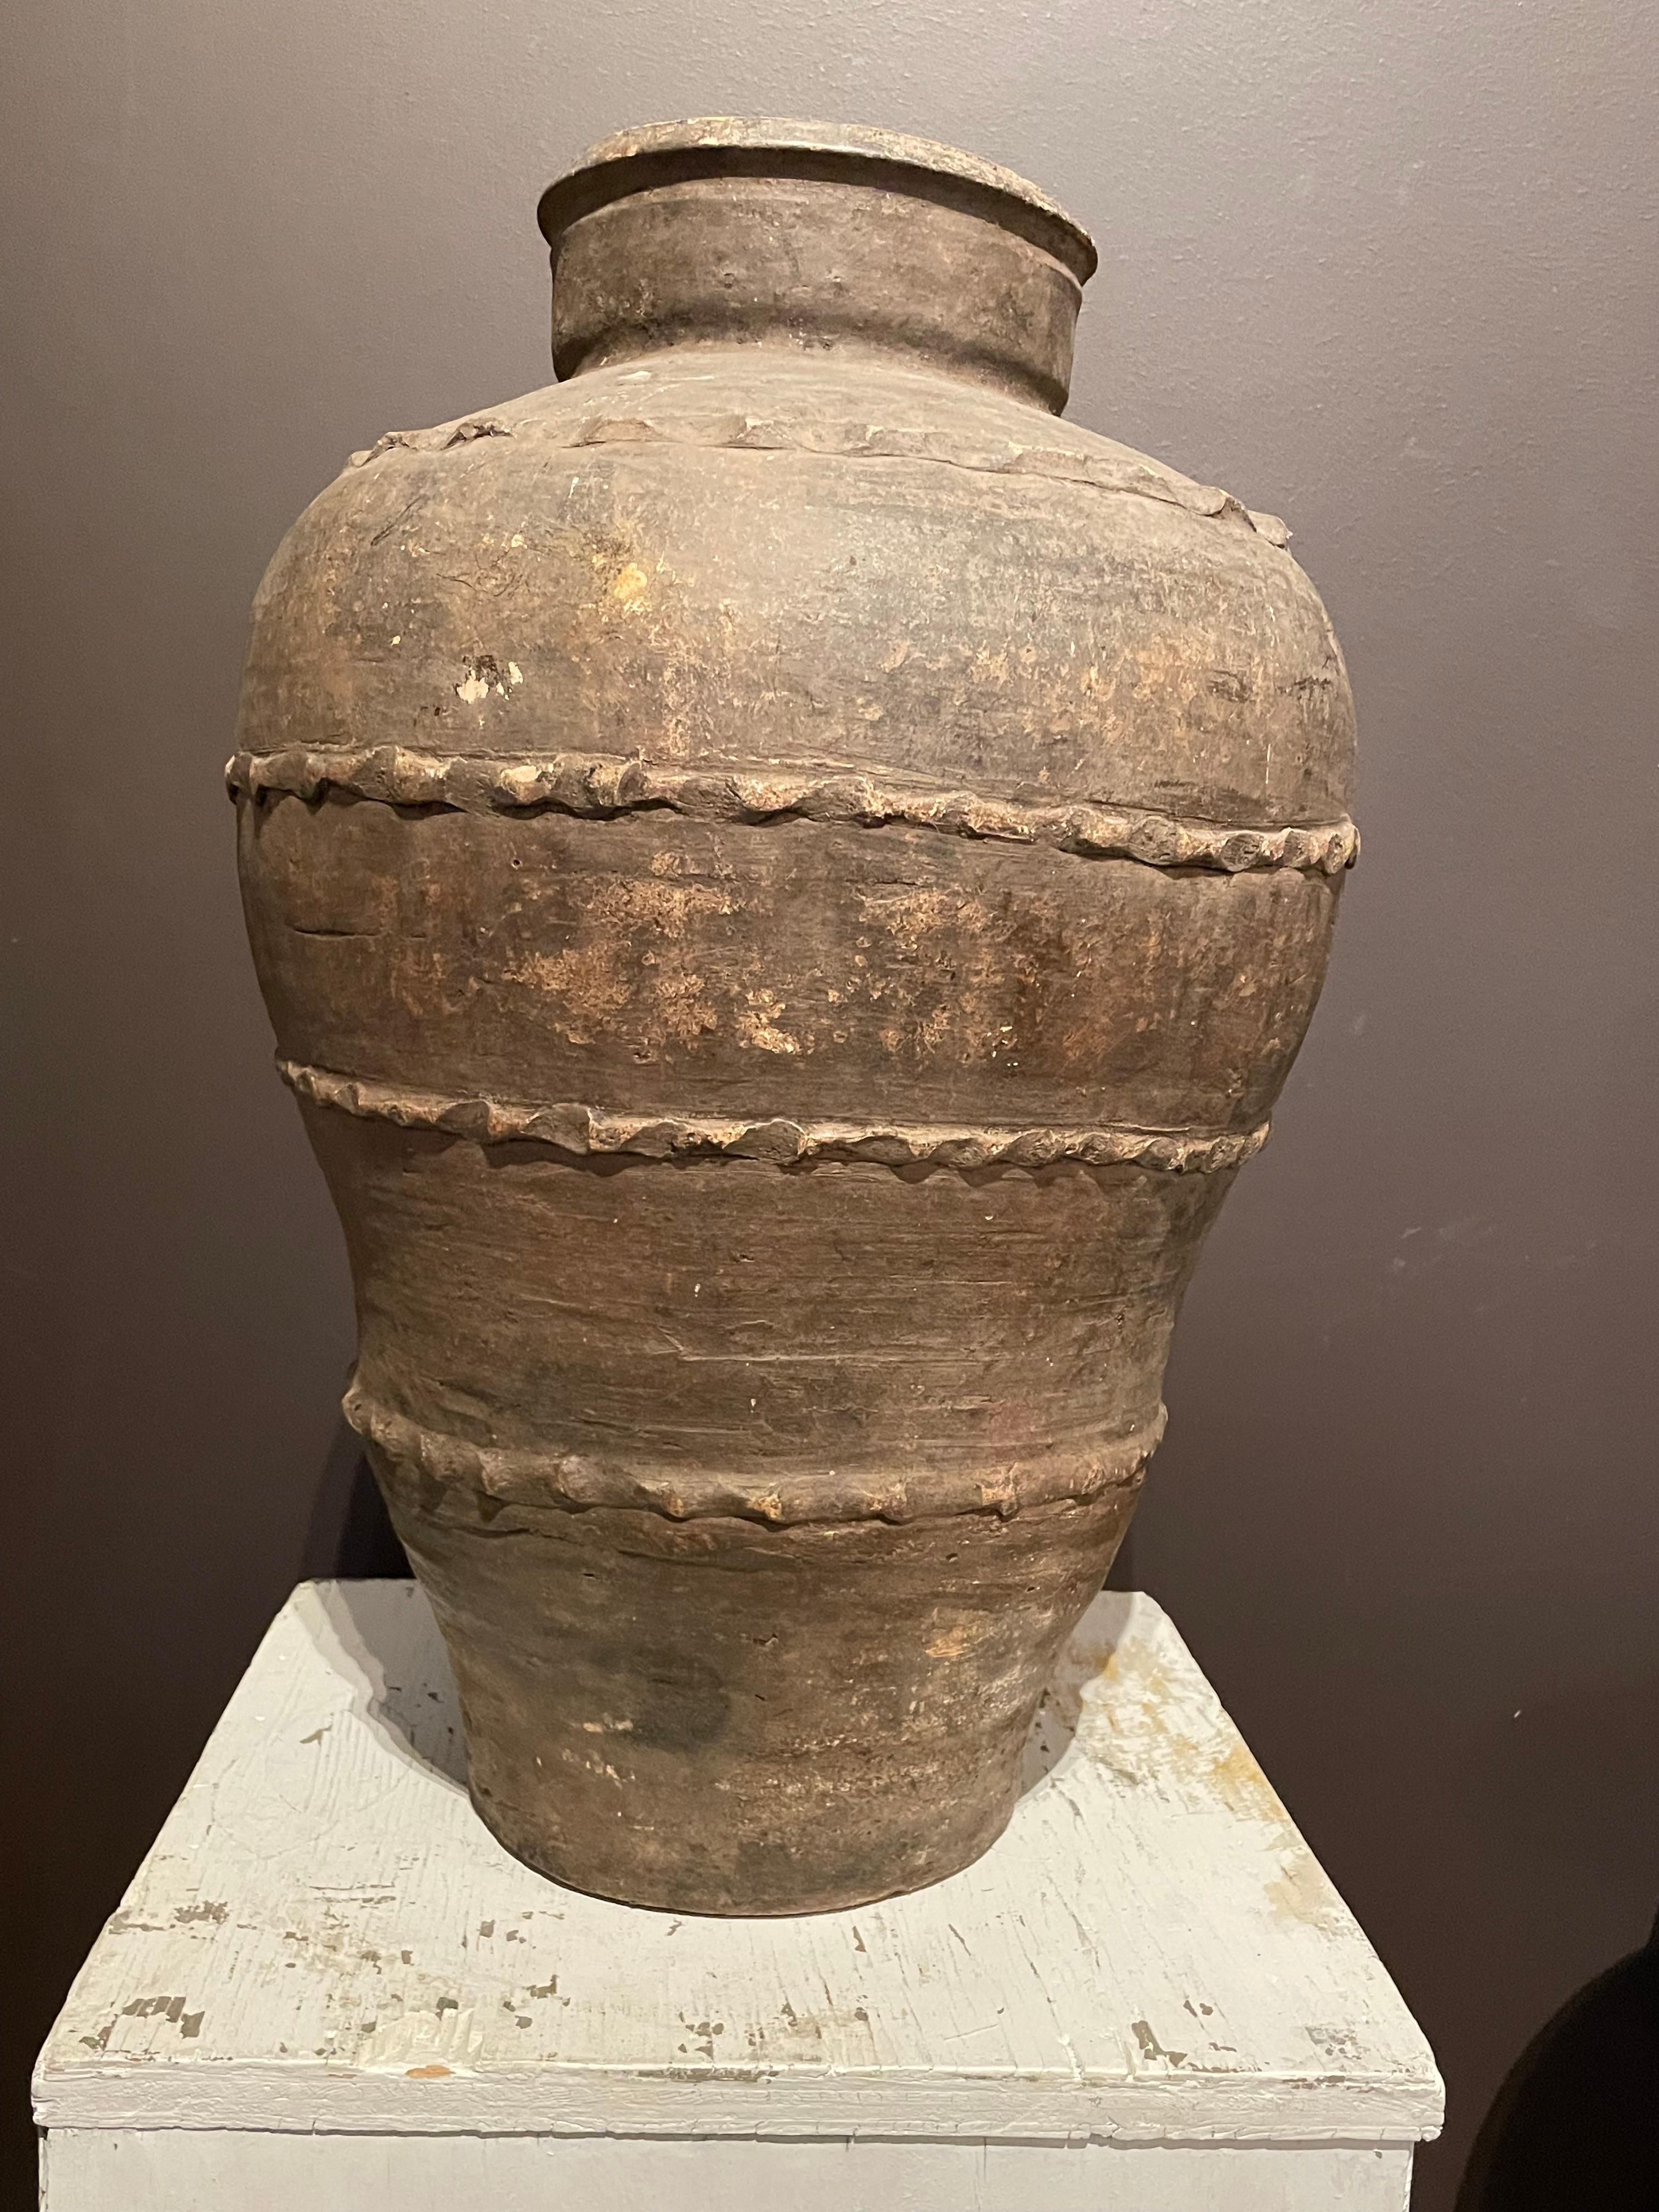 19th century Spanish terracotta olive pot.
Unearthed from a very large family run olive oil producing business in southern Spain.
Chocolate color with raised decorative indented bands.
Beautiful and natural aged patina.
One of many pieces from a